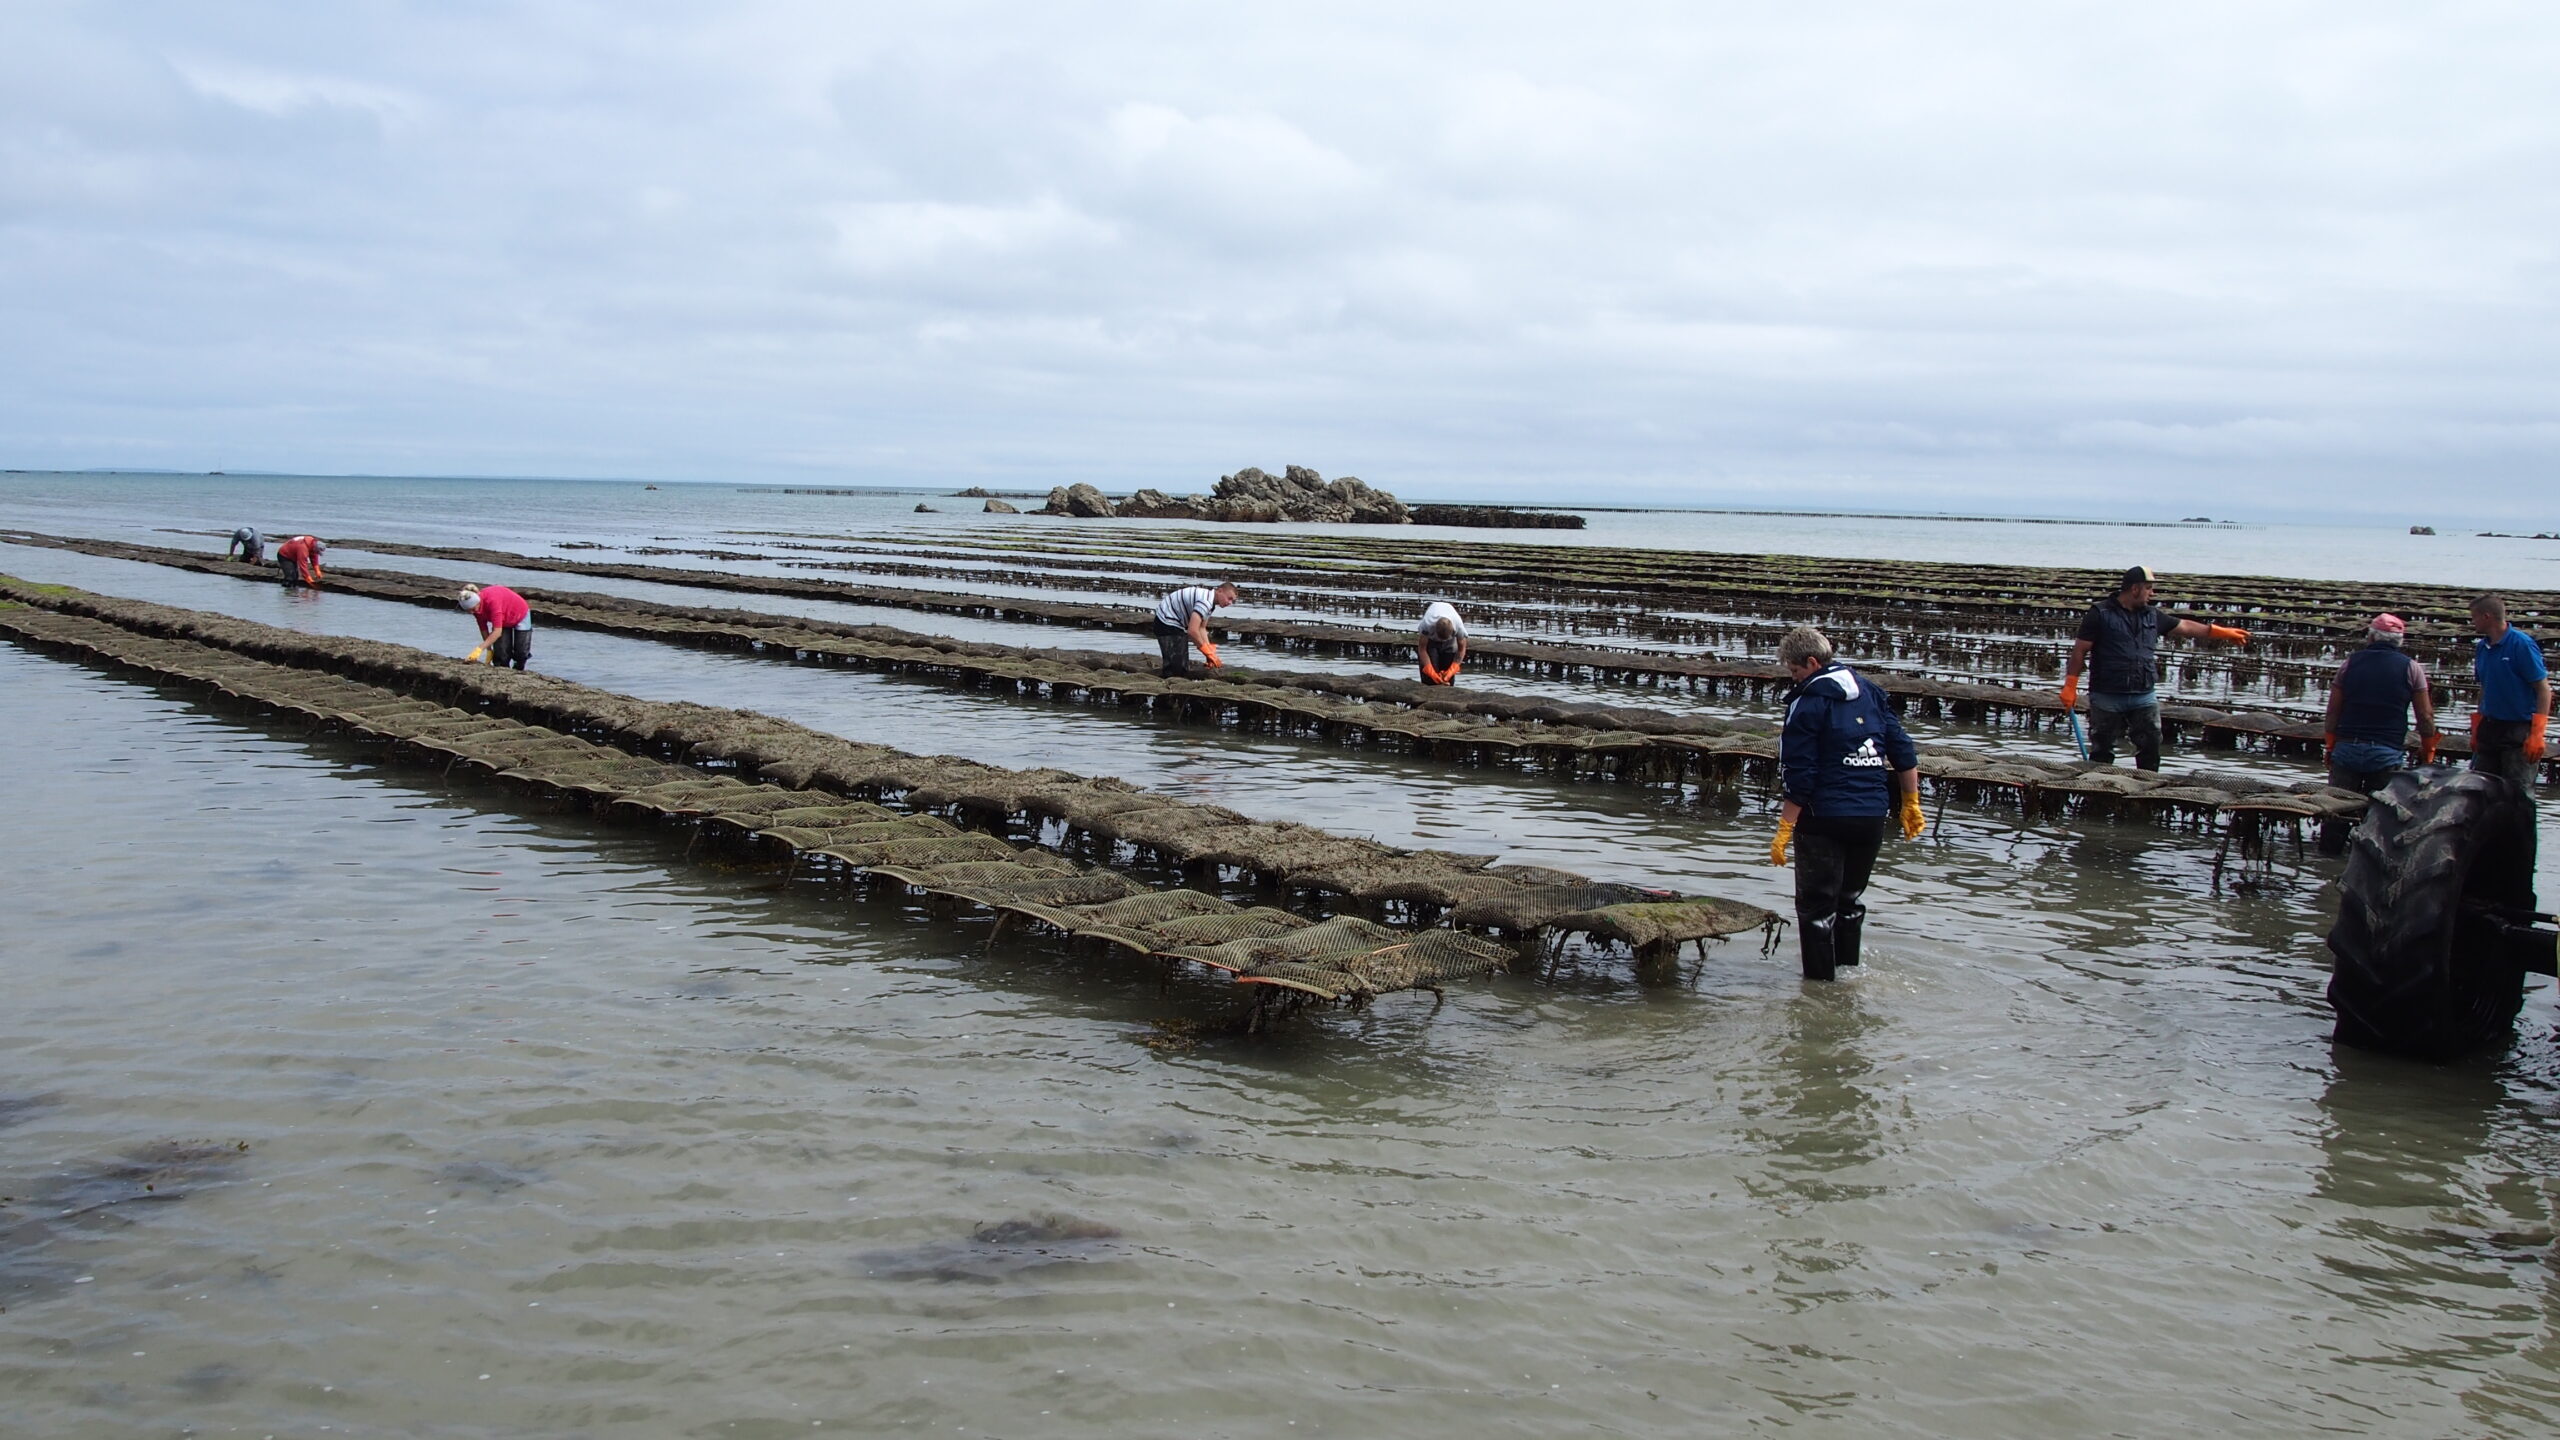 Capturing the contributions and services of the Pacific oyster to the UK’s marine environment and coastal economy.